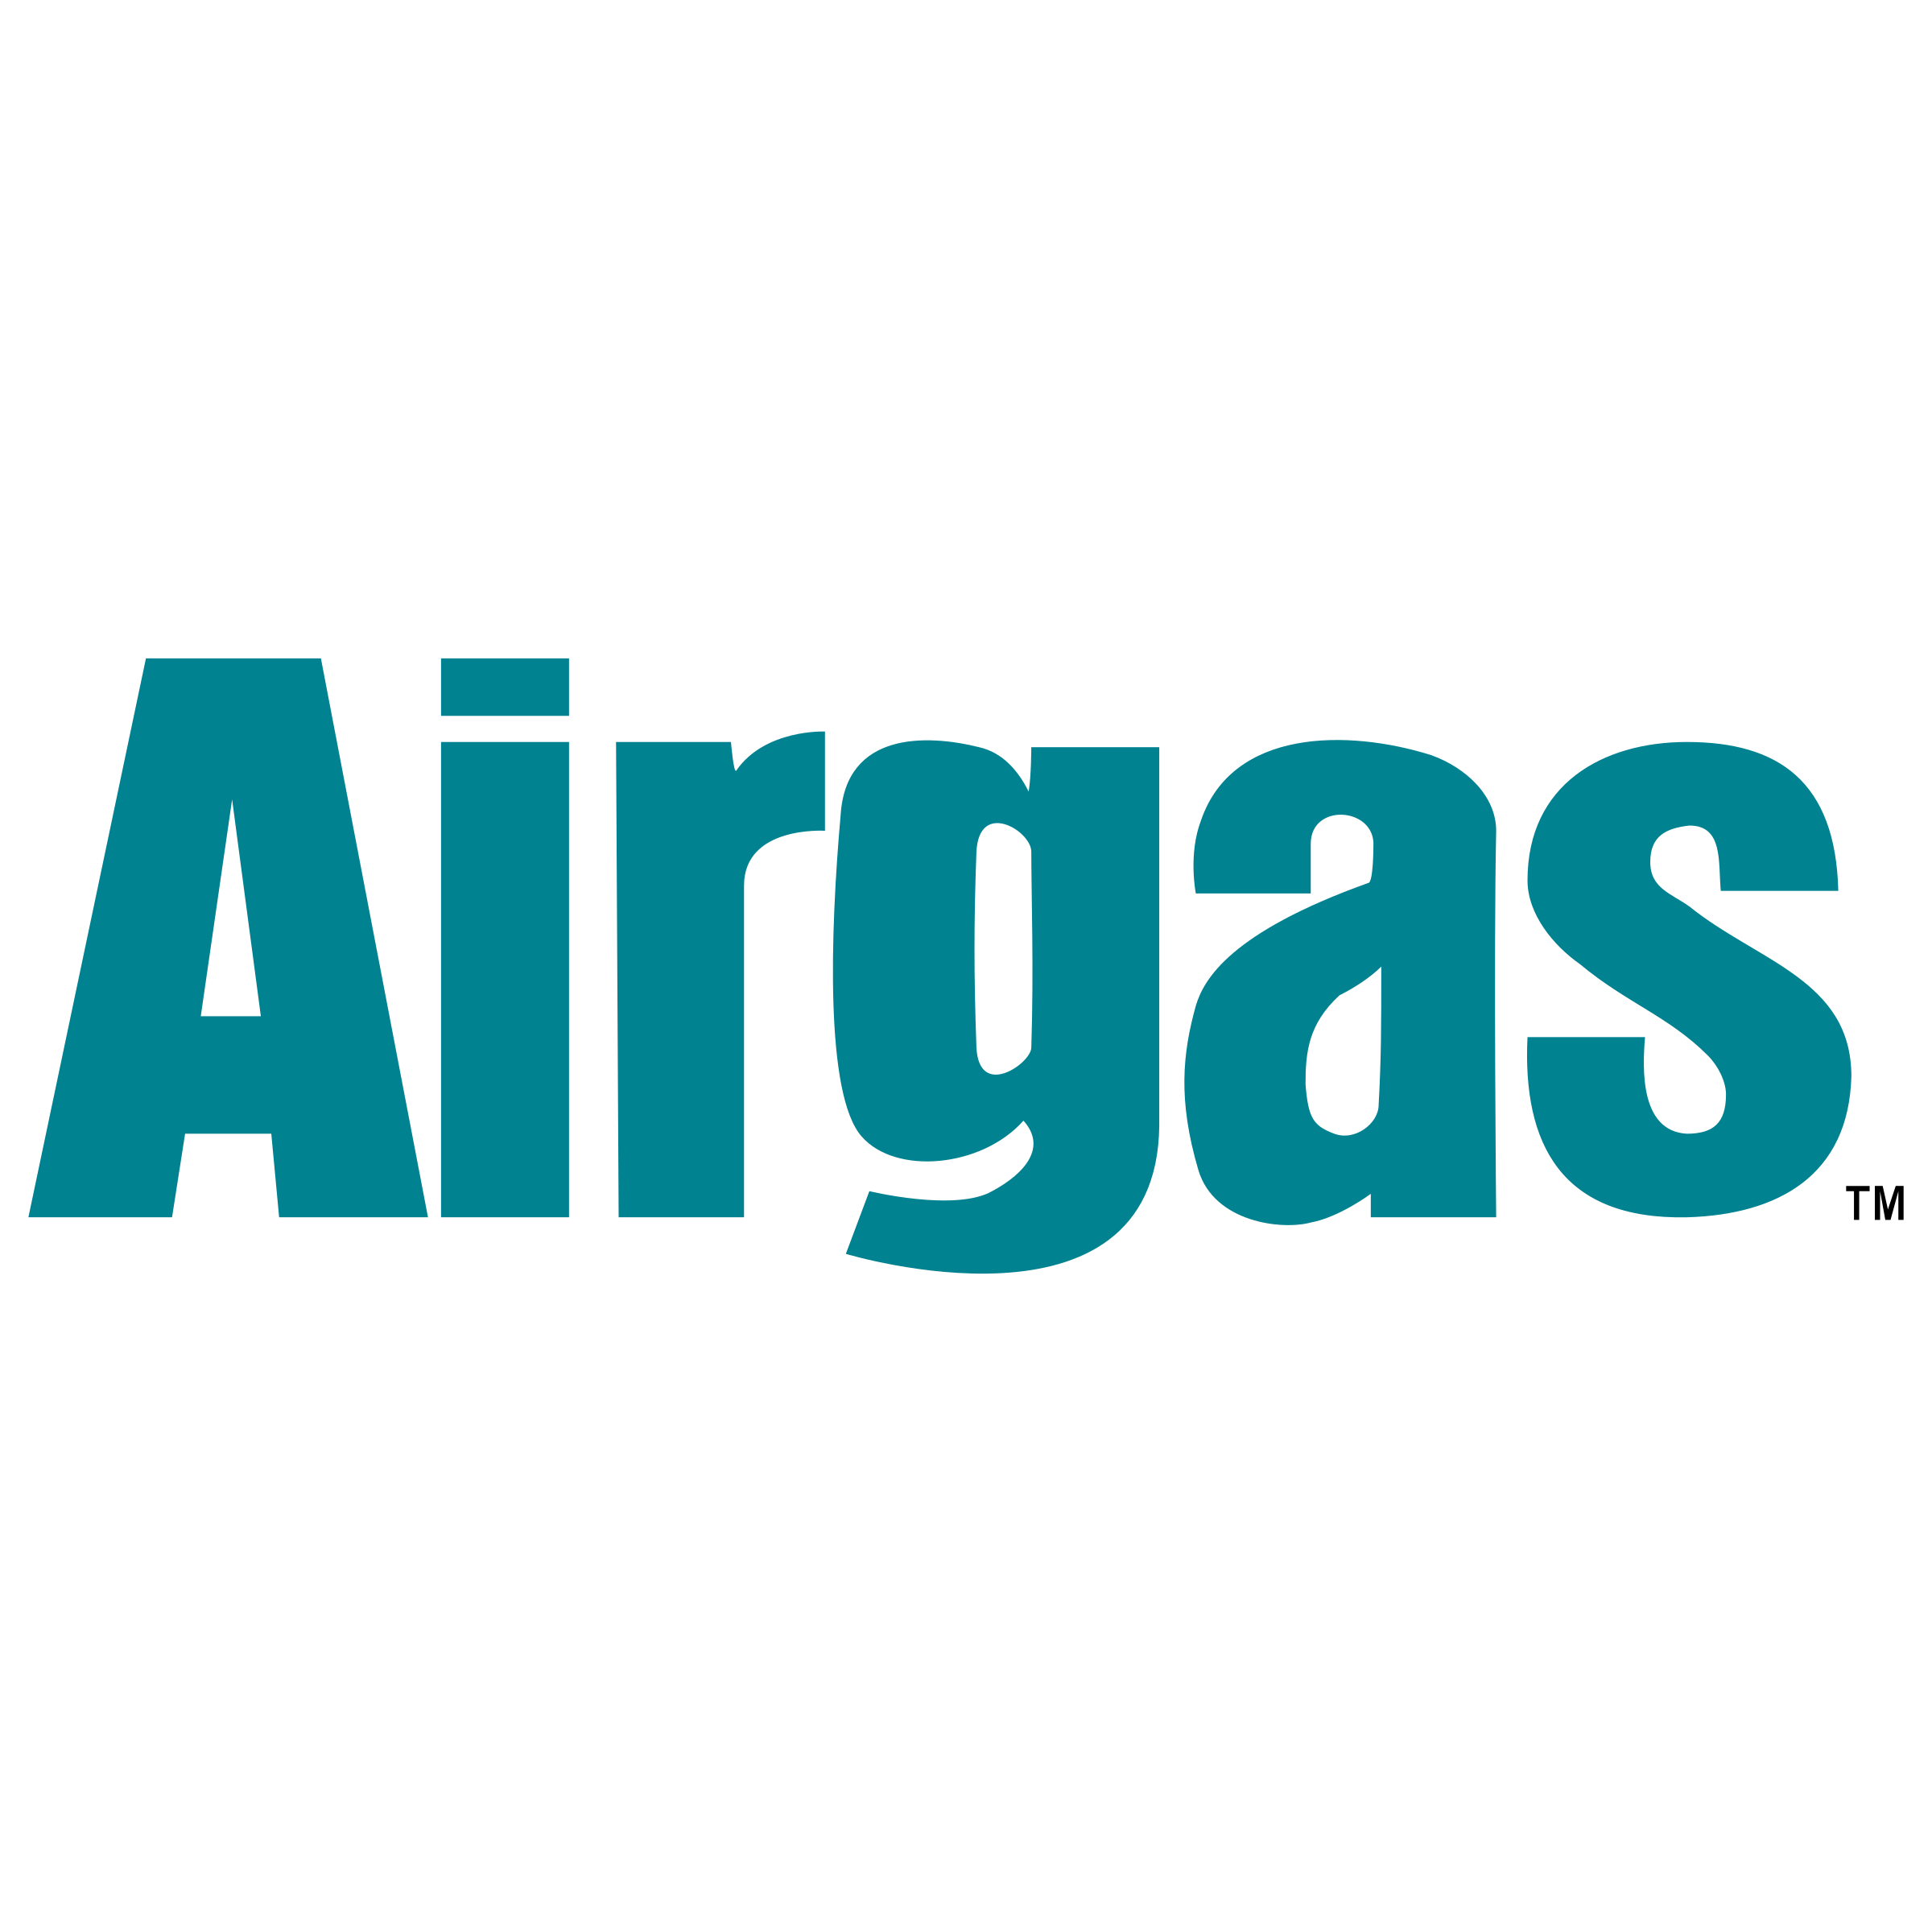 airgas@2x.png